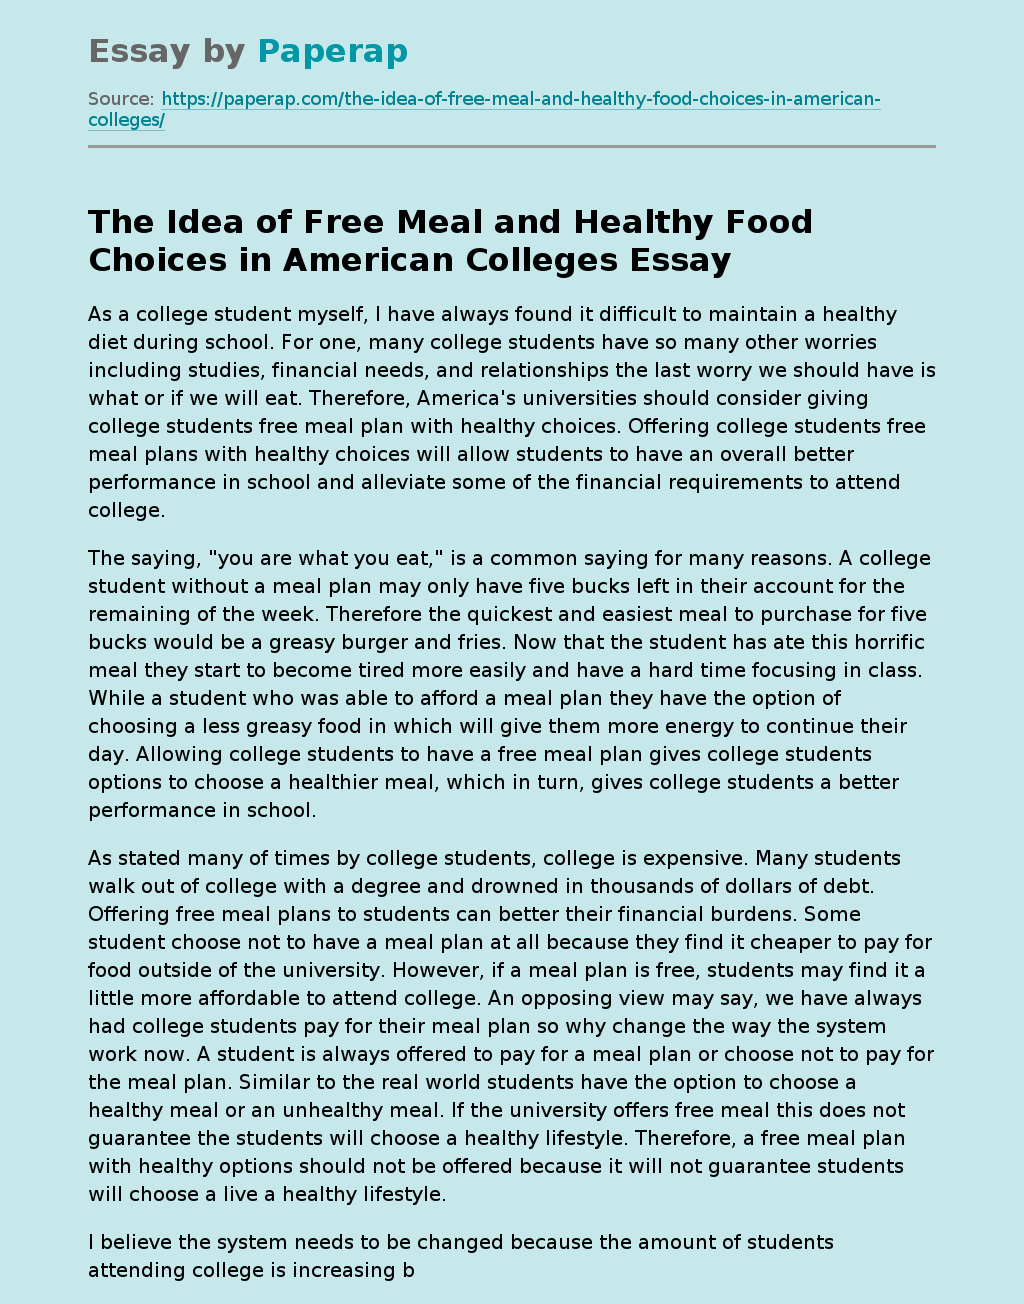 The Idea of Free Meal and Healthy Food Choices in American Colleges